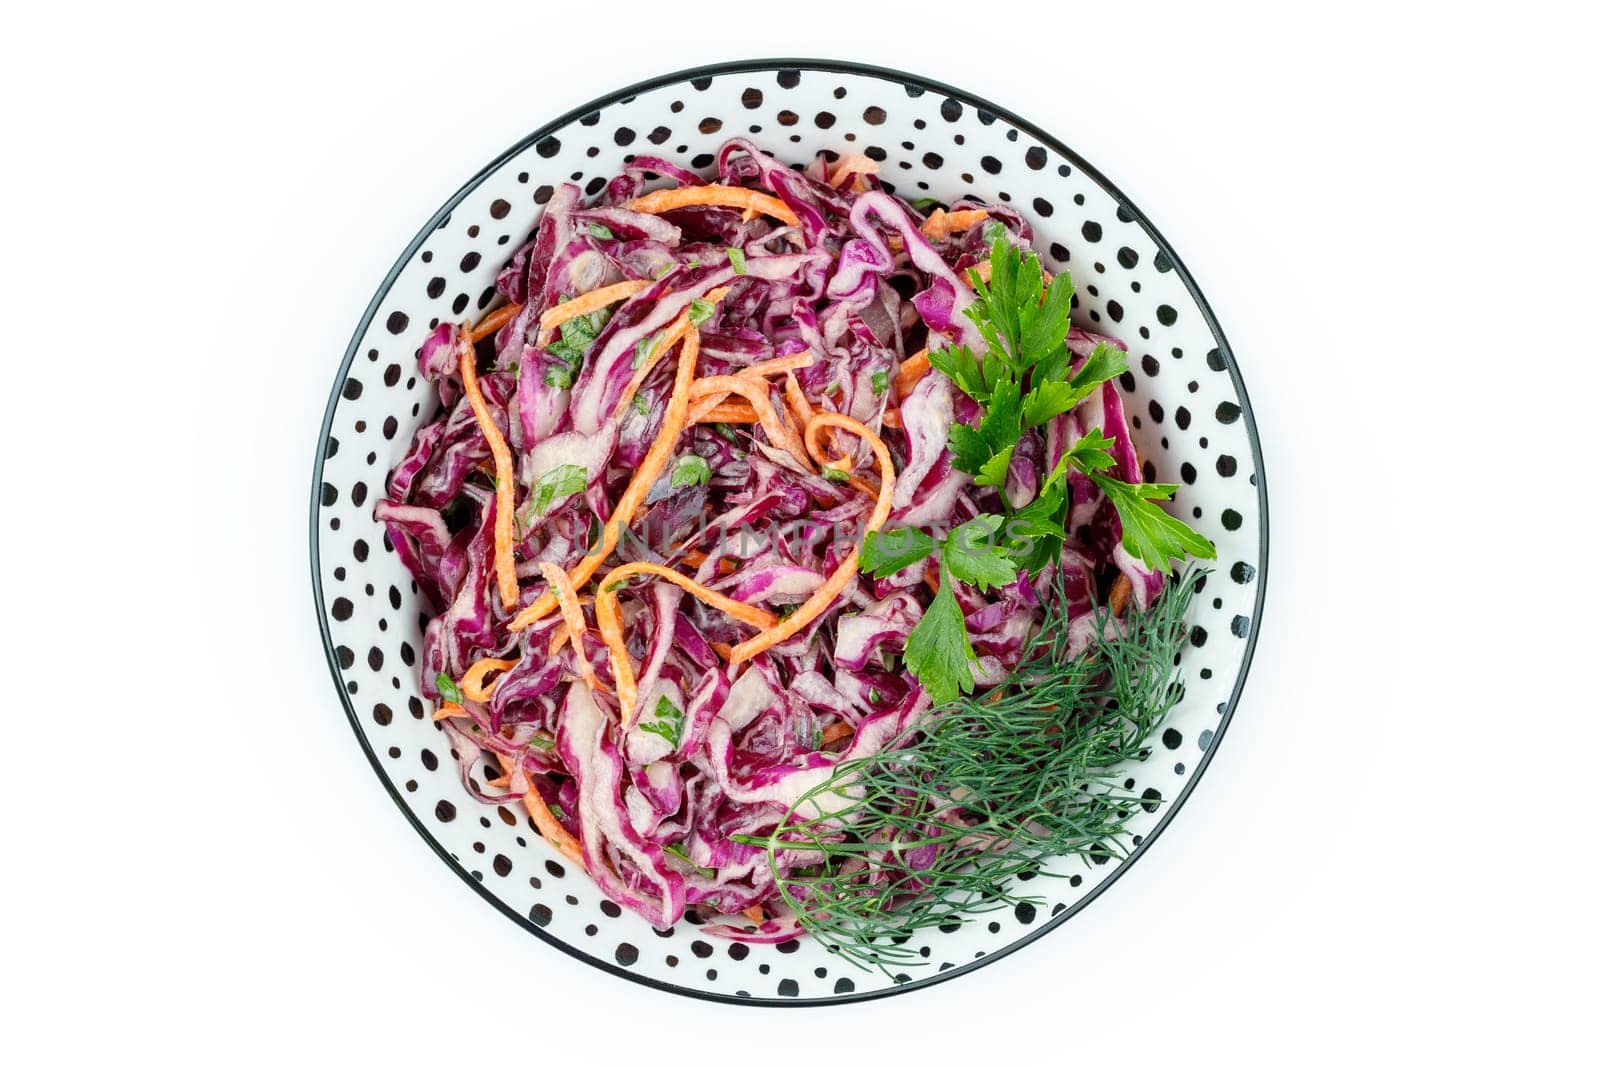 A colorful plate of coleslaw salad